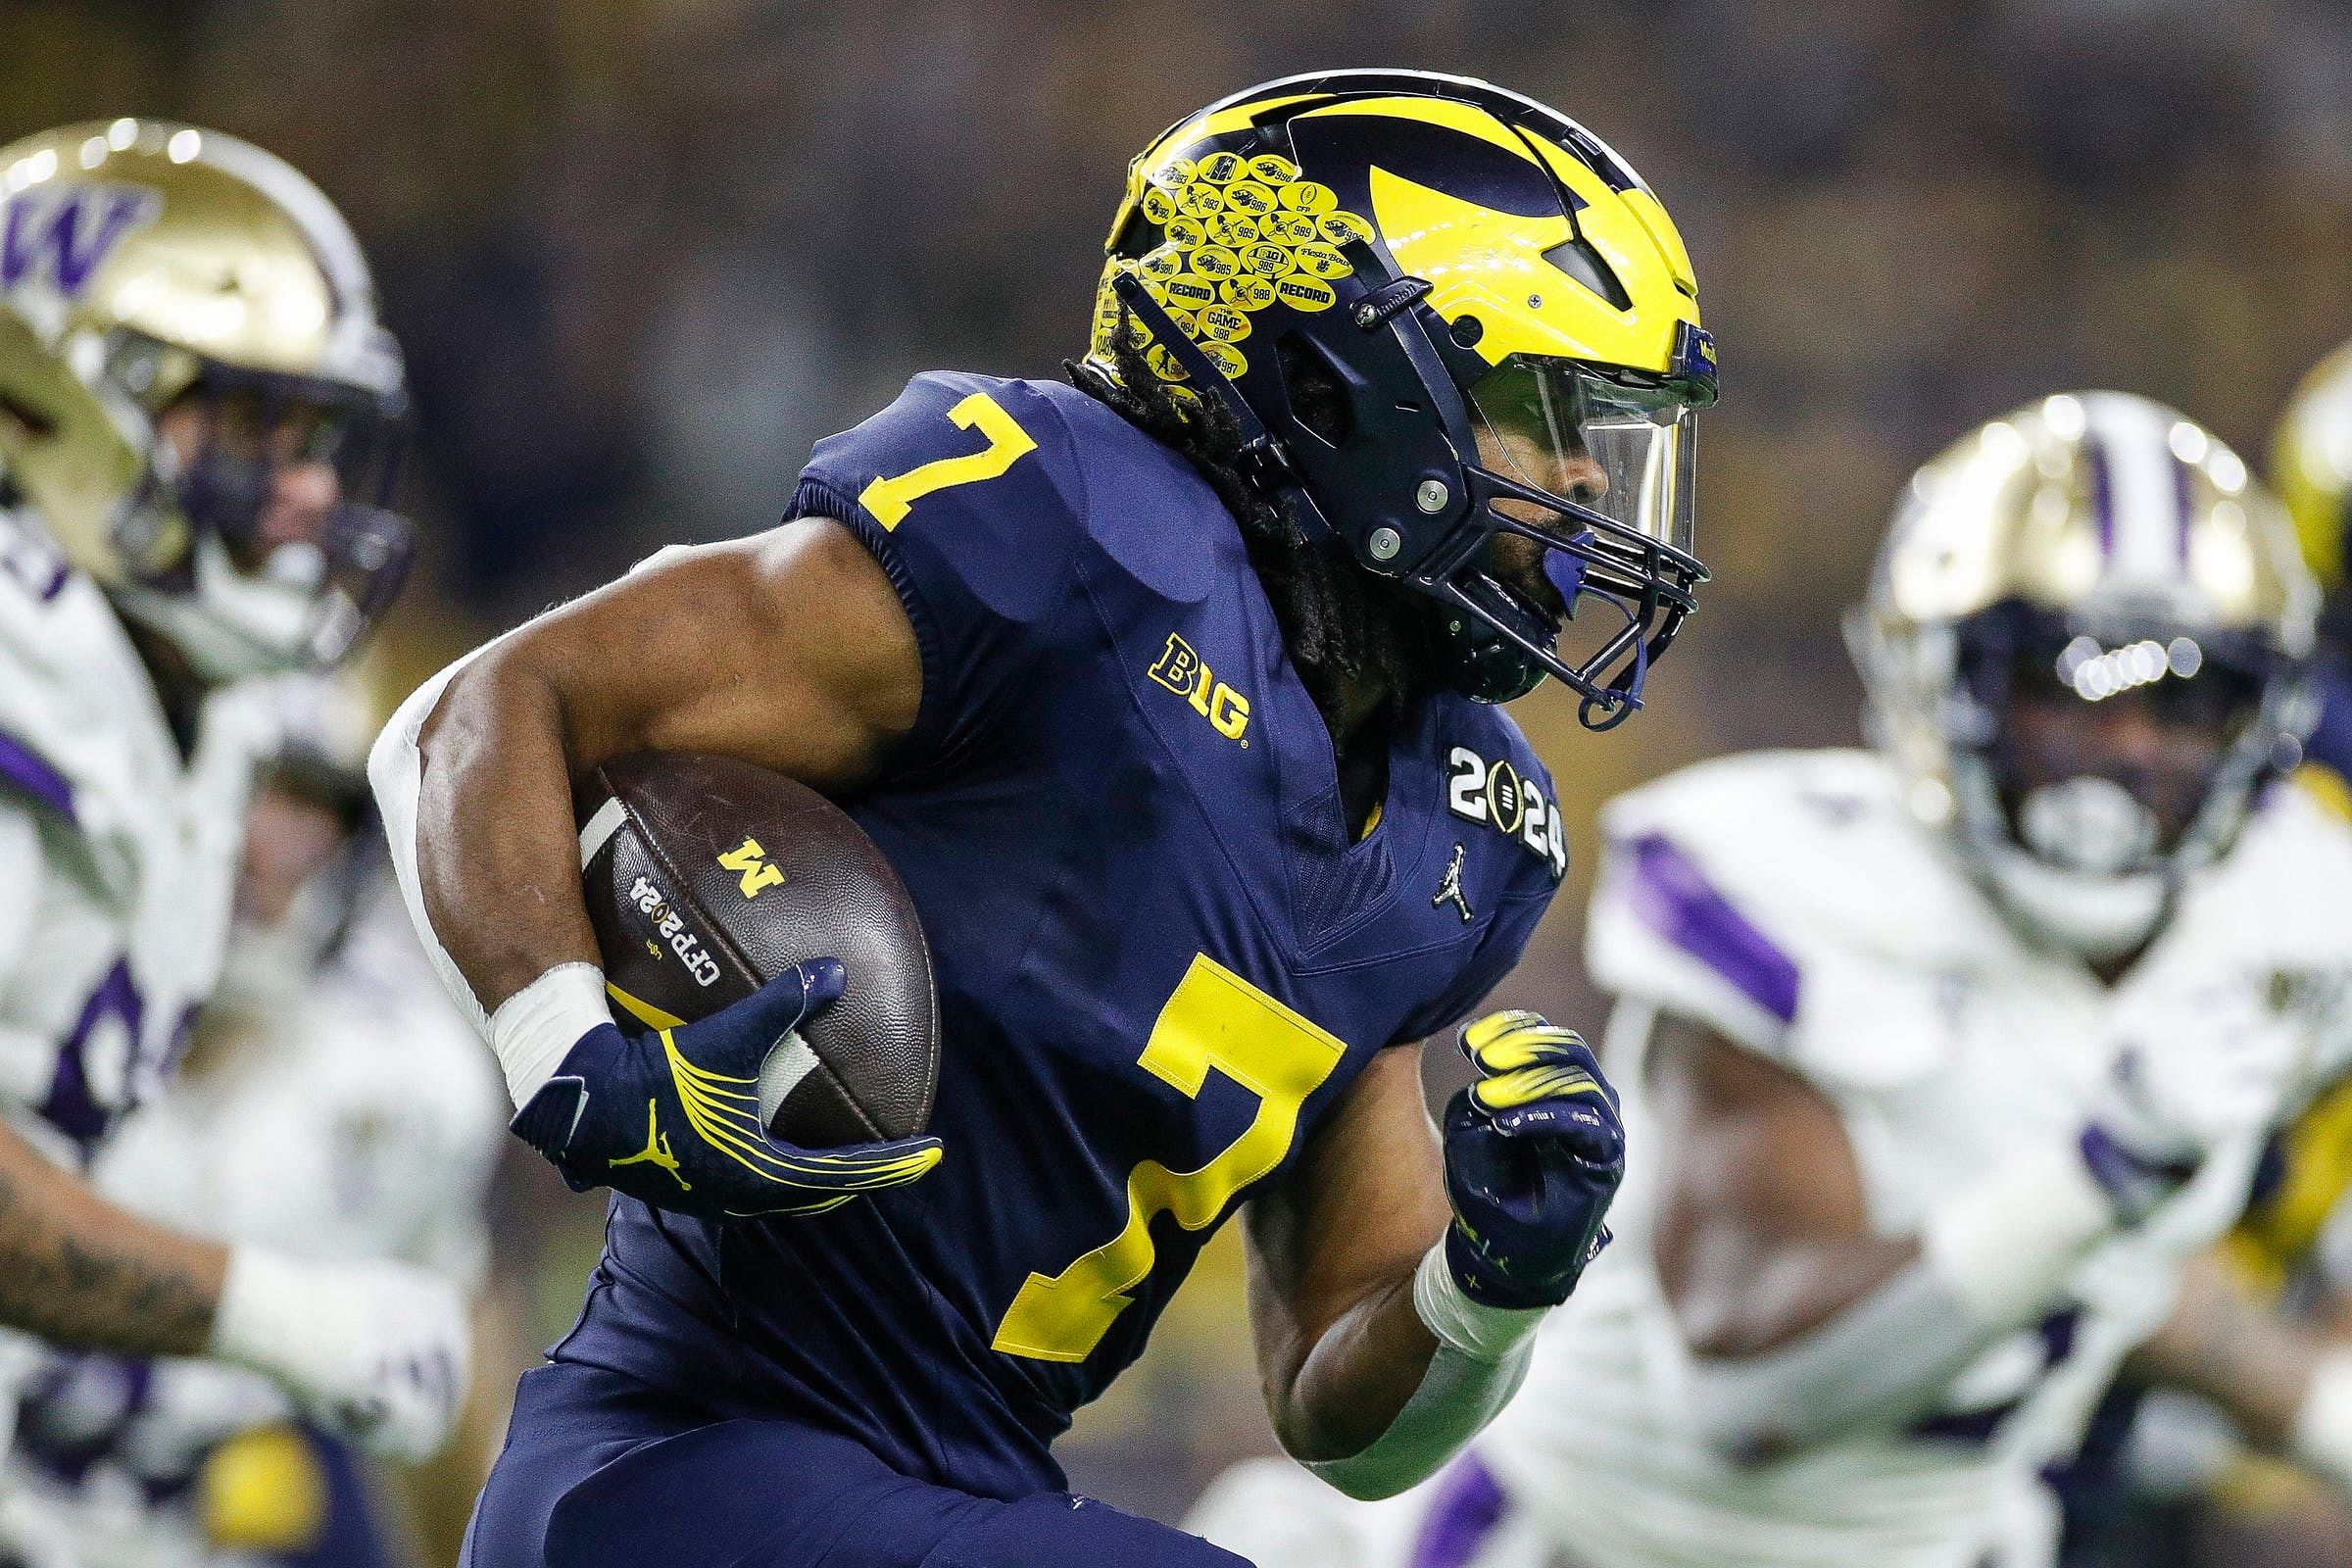 Donovan Edwards looked ready for the position of top running back after he played well in the Michigan spring game on Saturday.